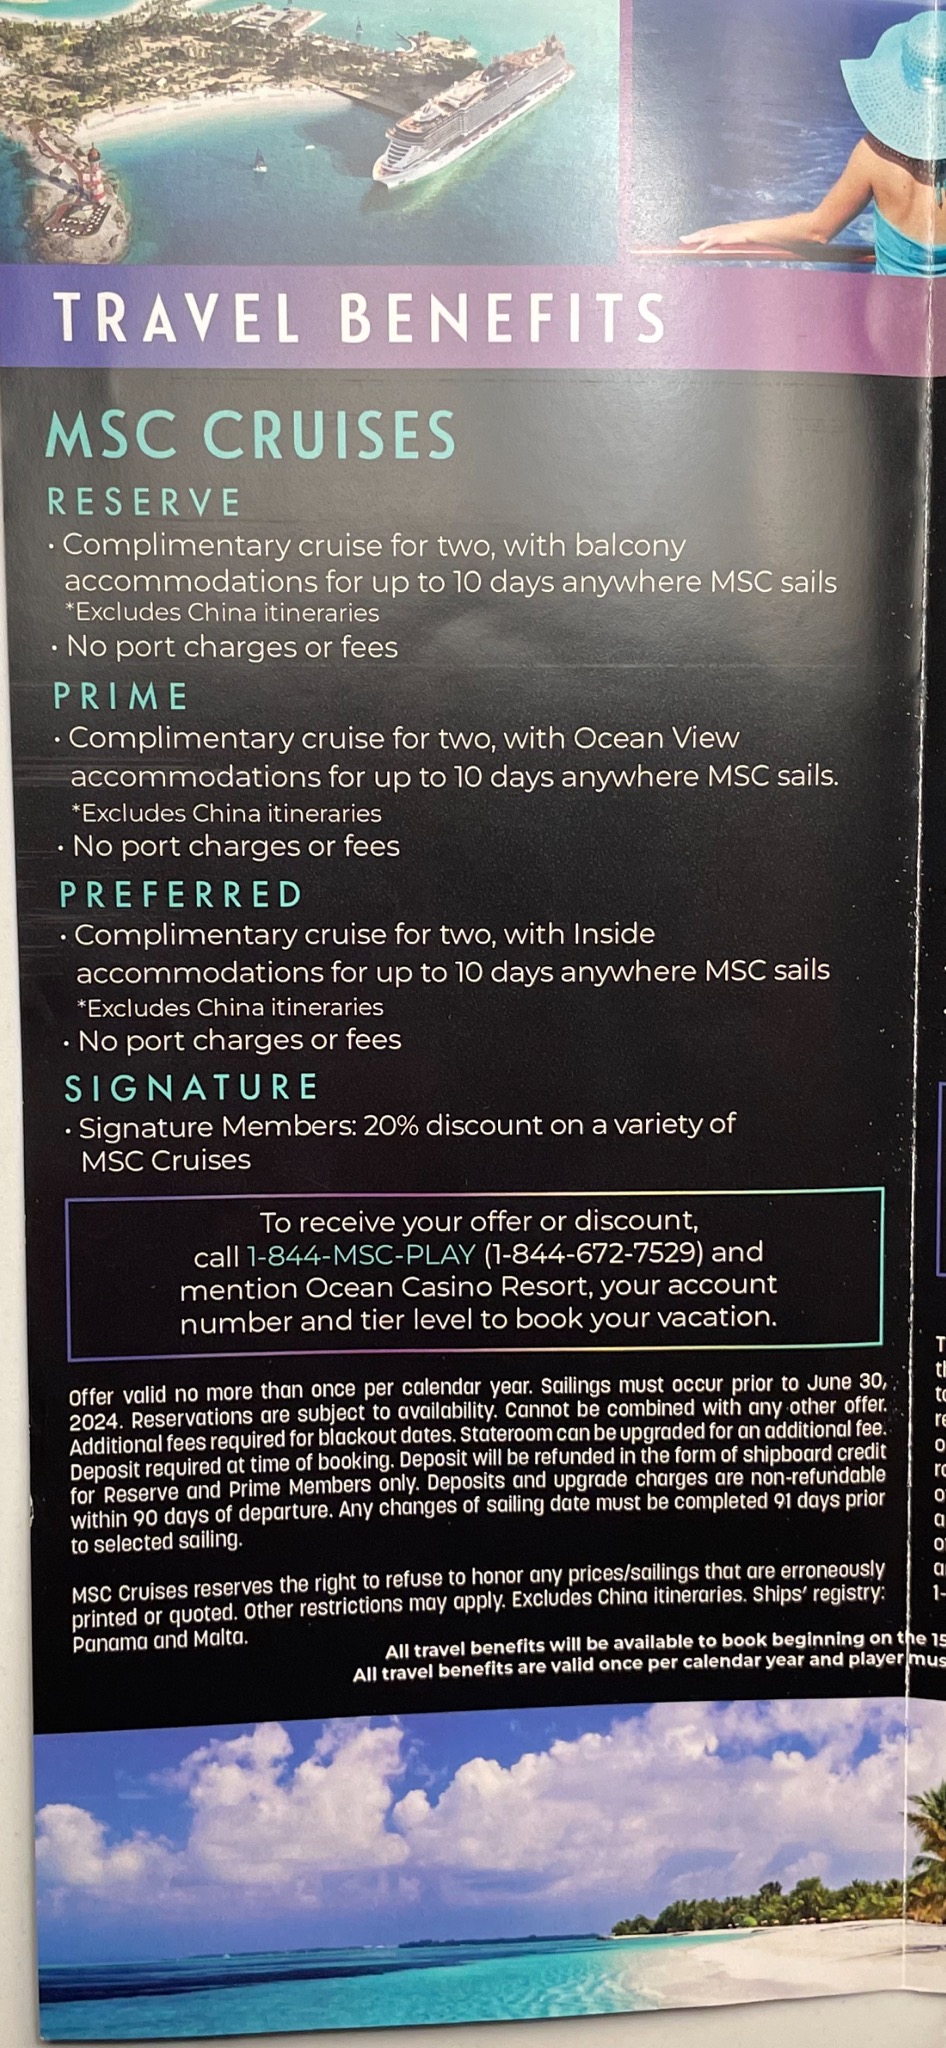 a sign on a cruise ship